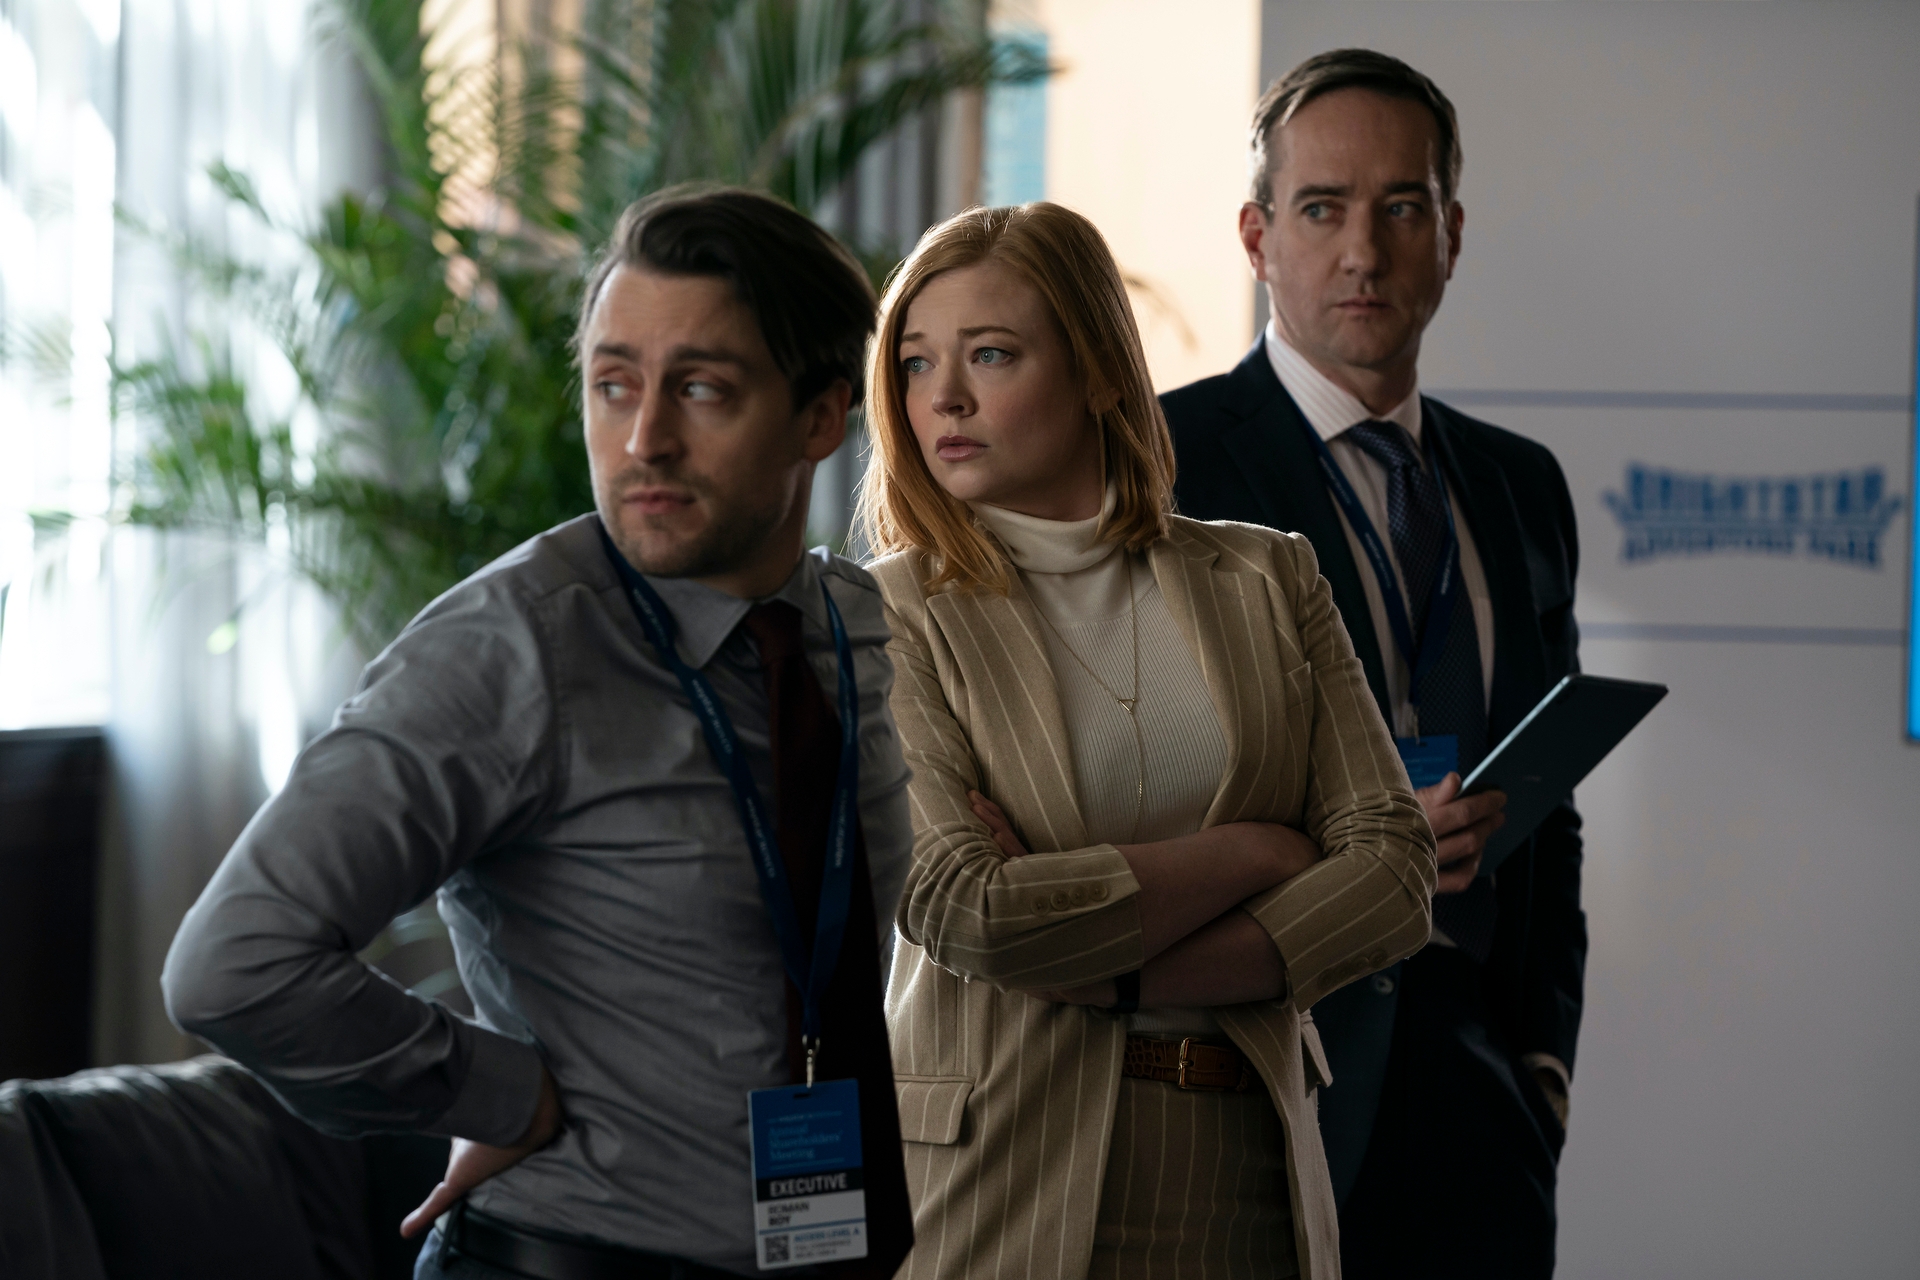 Hitting below the belt: Succession’s heated volley of sexualized insults